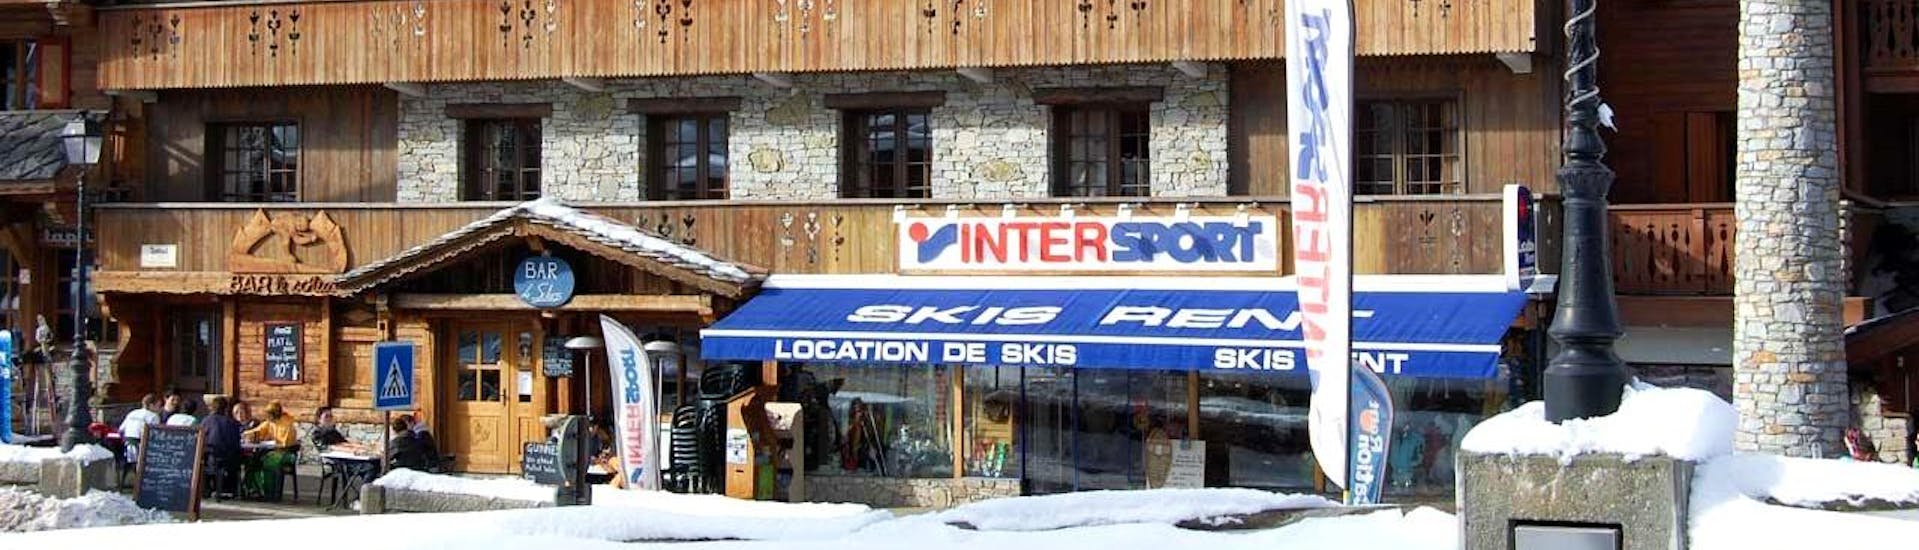 A picture of the front of Intersport ski rental shop in Courchevel 1650, France.